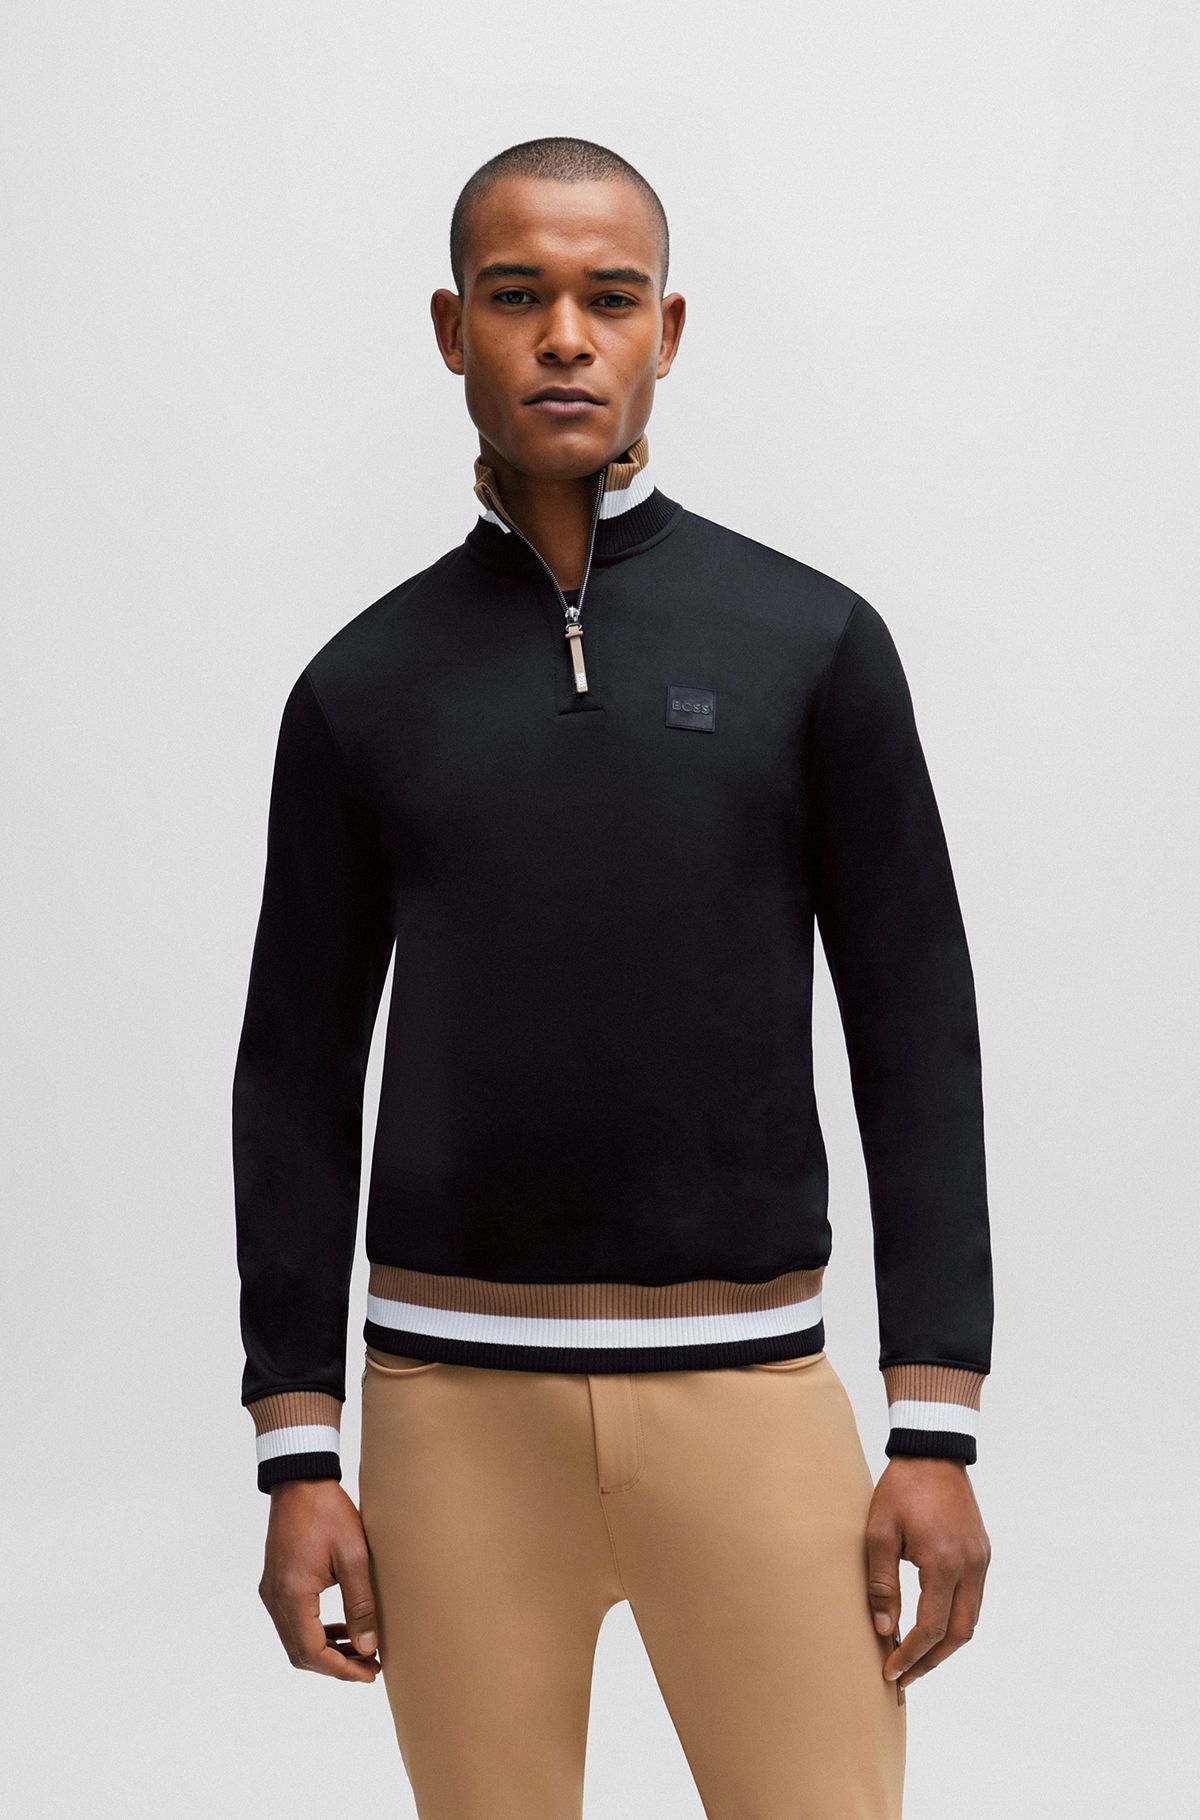 Equestrian sweater in black with signature stripes and logos, Black